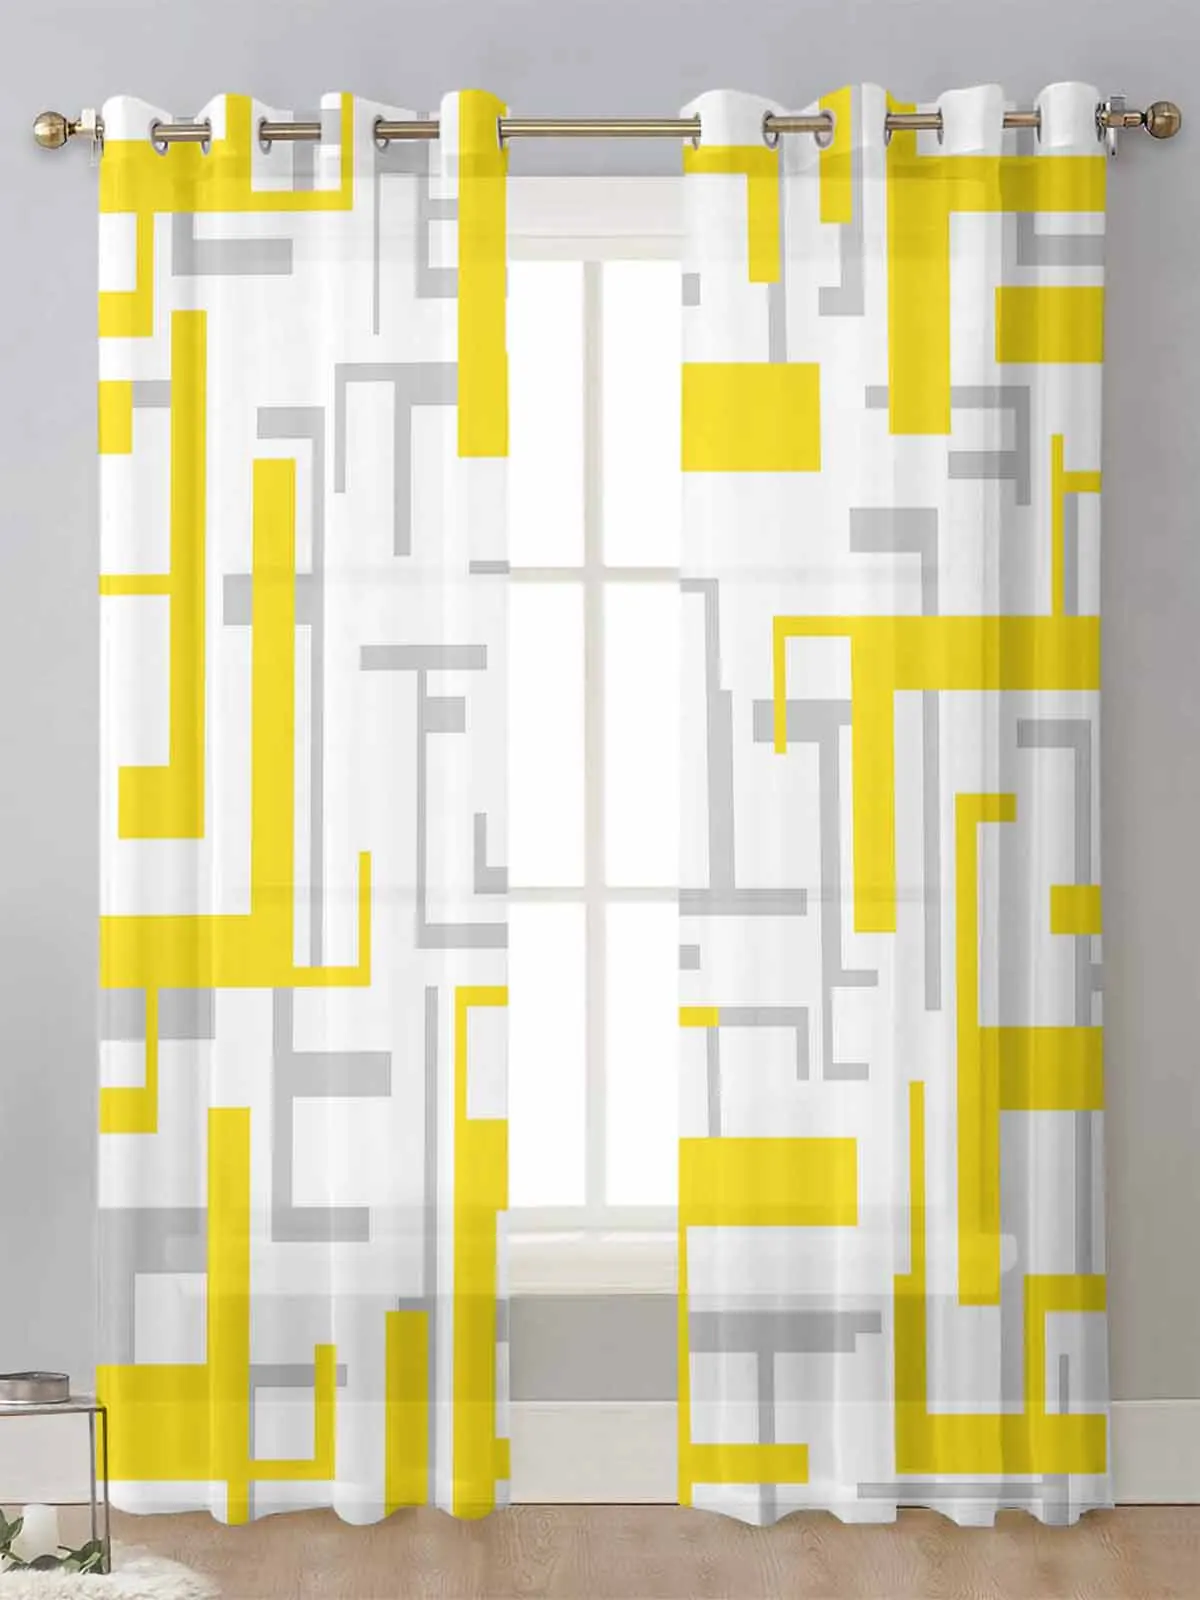 

Modern Art Geometry Yellow Grey Sheer Curtains For Living Room Window Transparent Voile Tulle Curtain Cortinas Drapes Home Decor